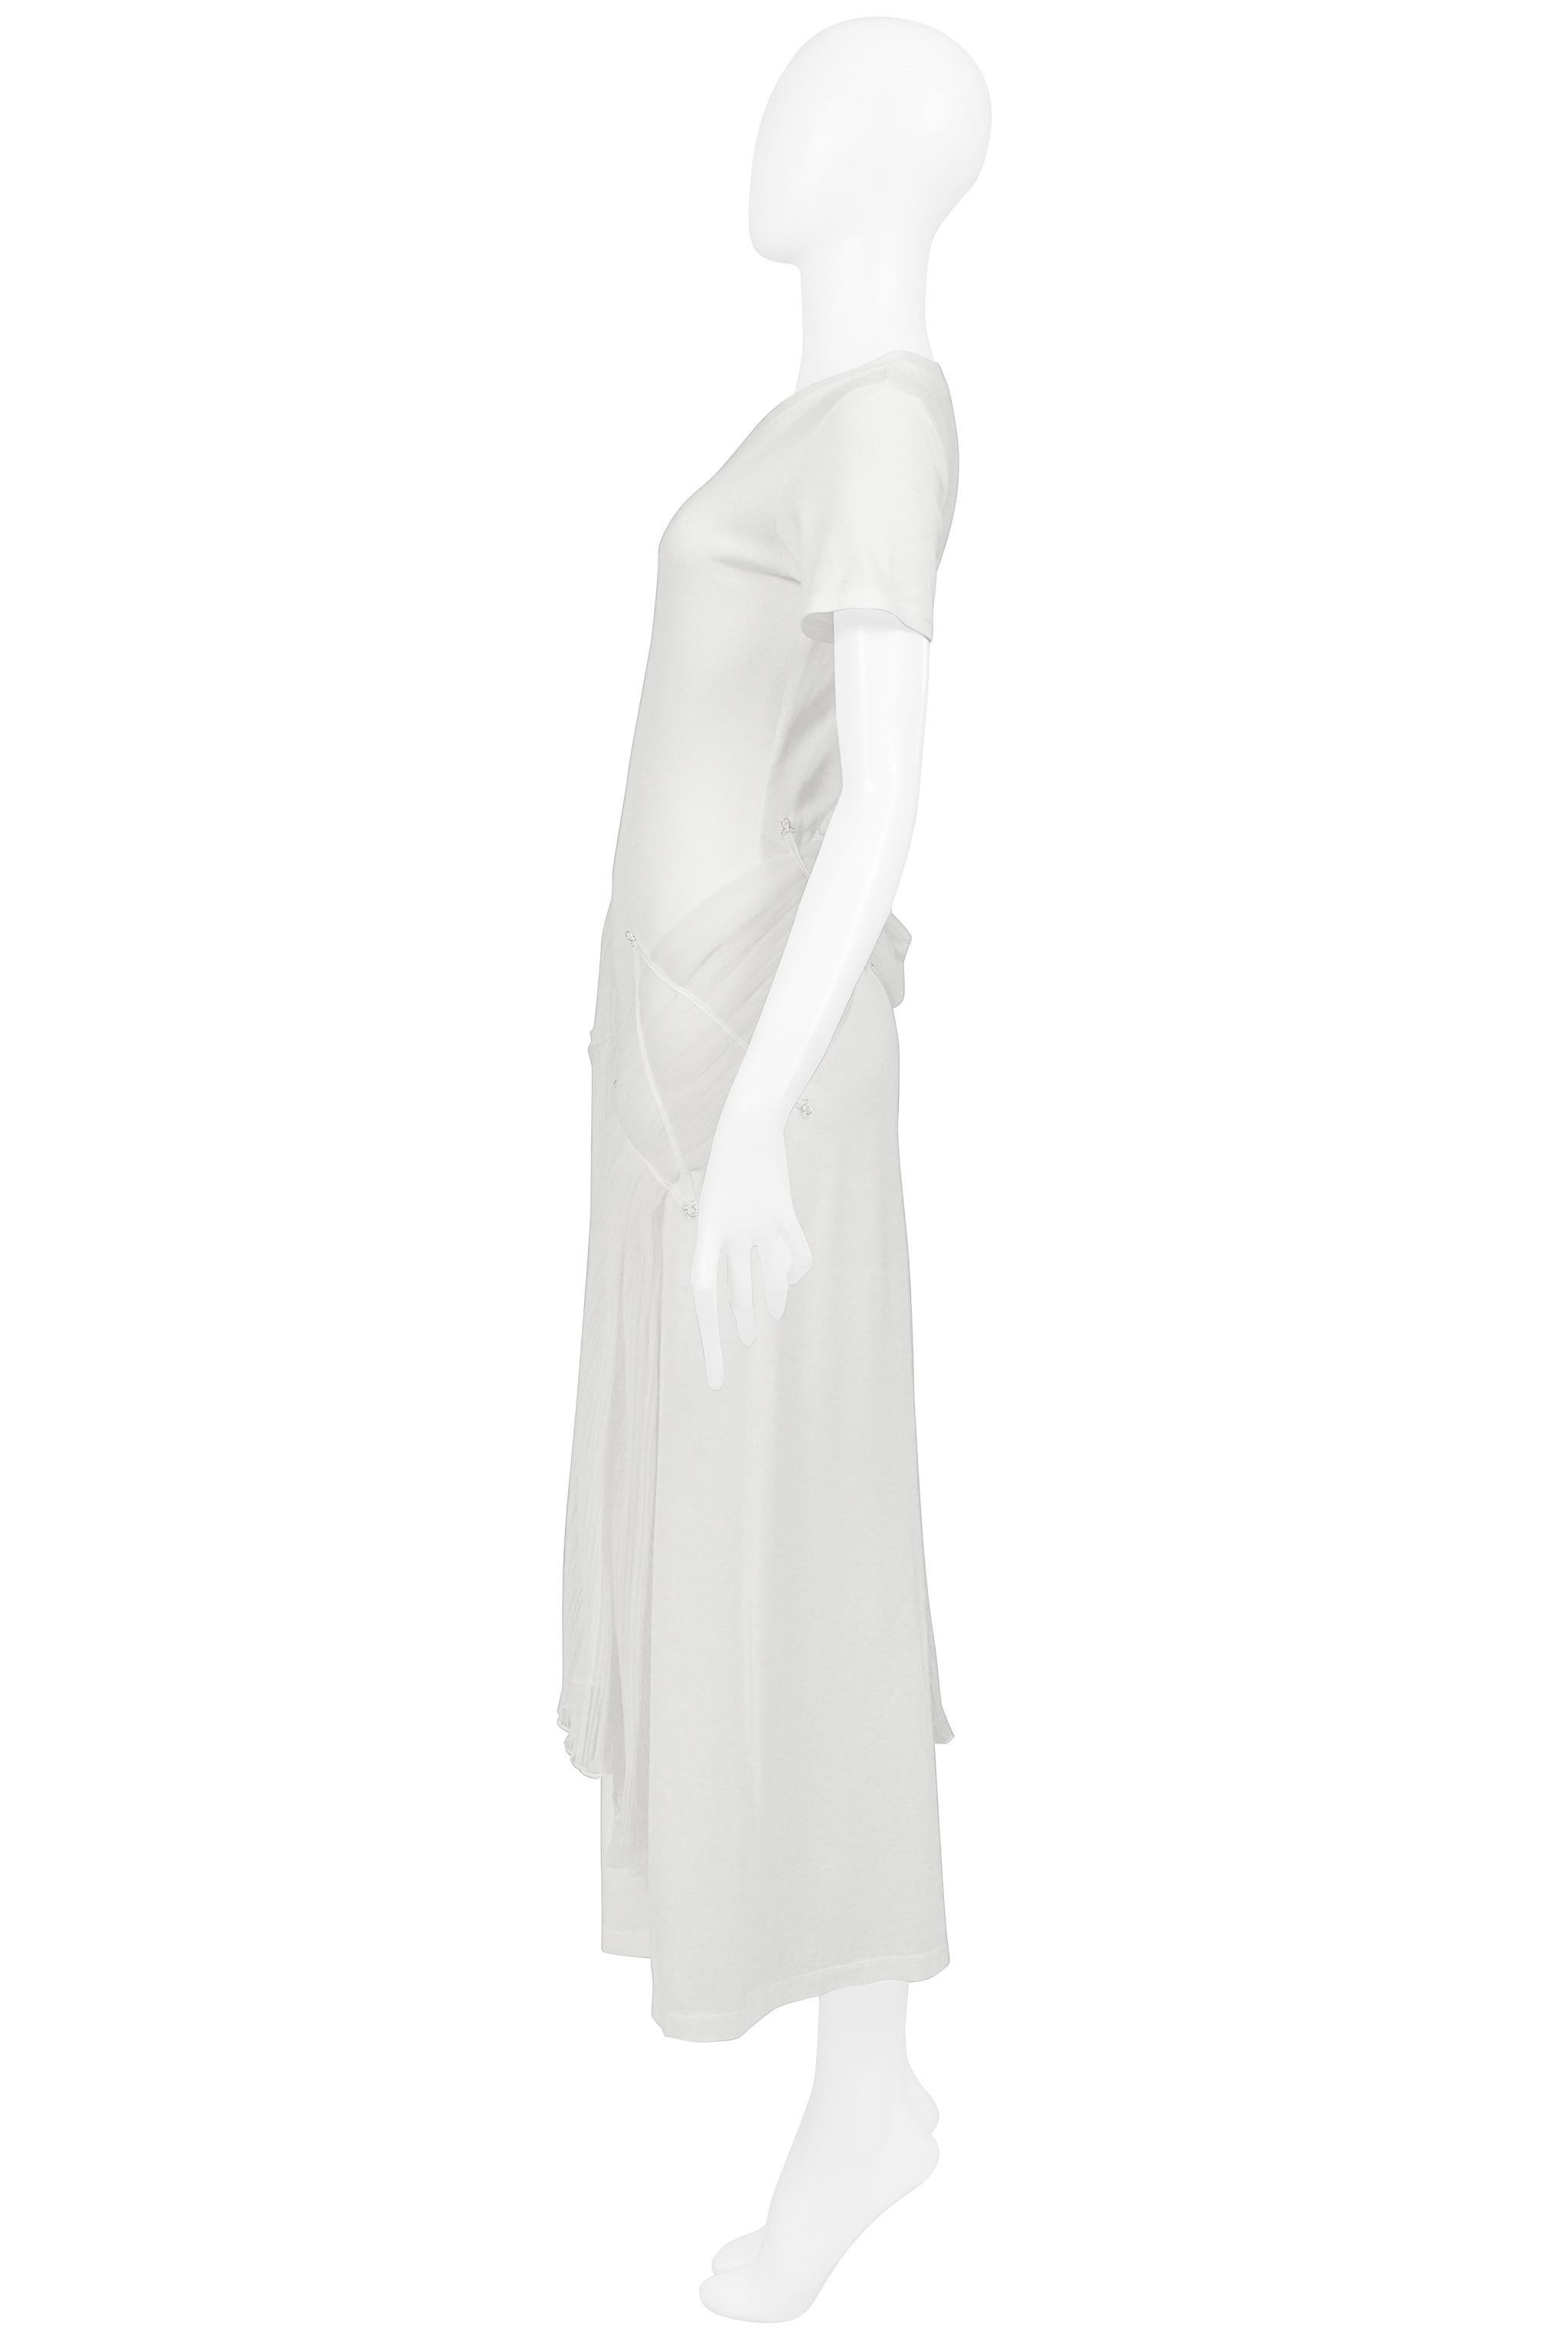 Issey Miyake Iconic White Goddess Concept Dress 2003 For Sale 6